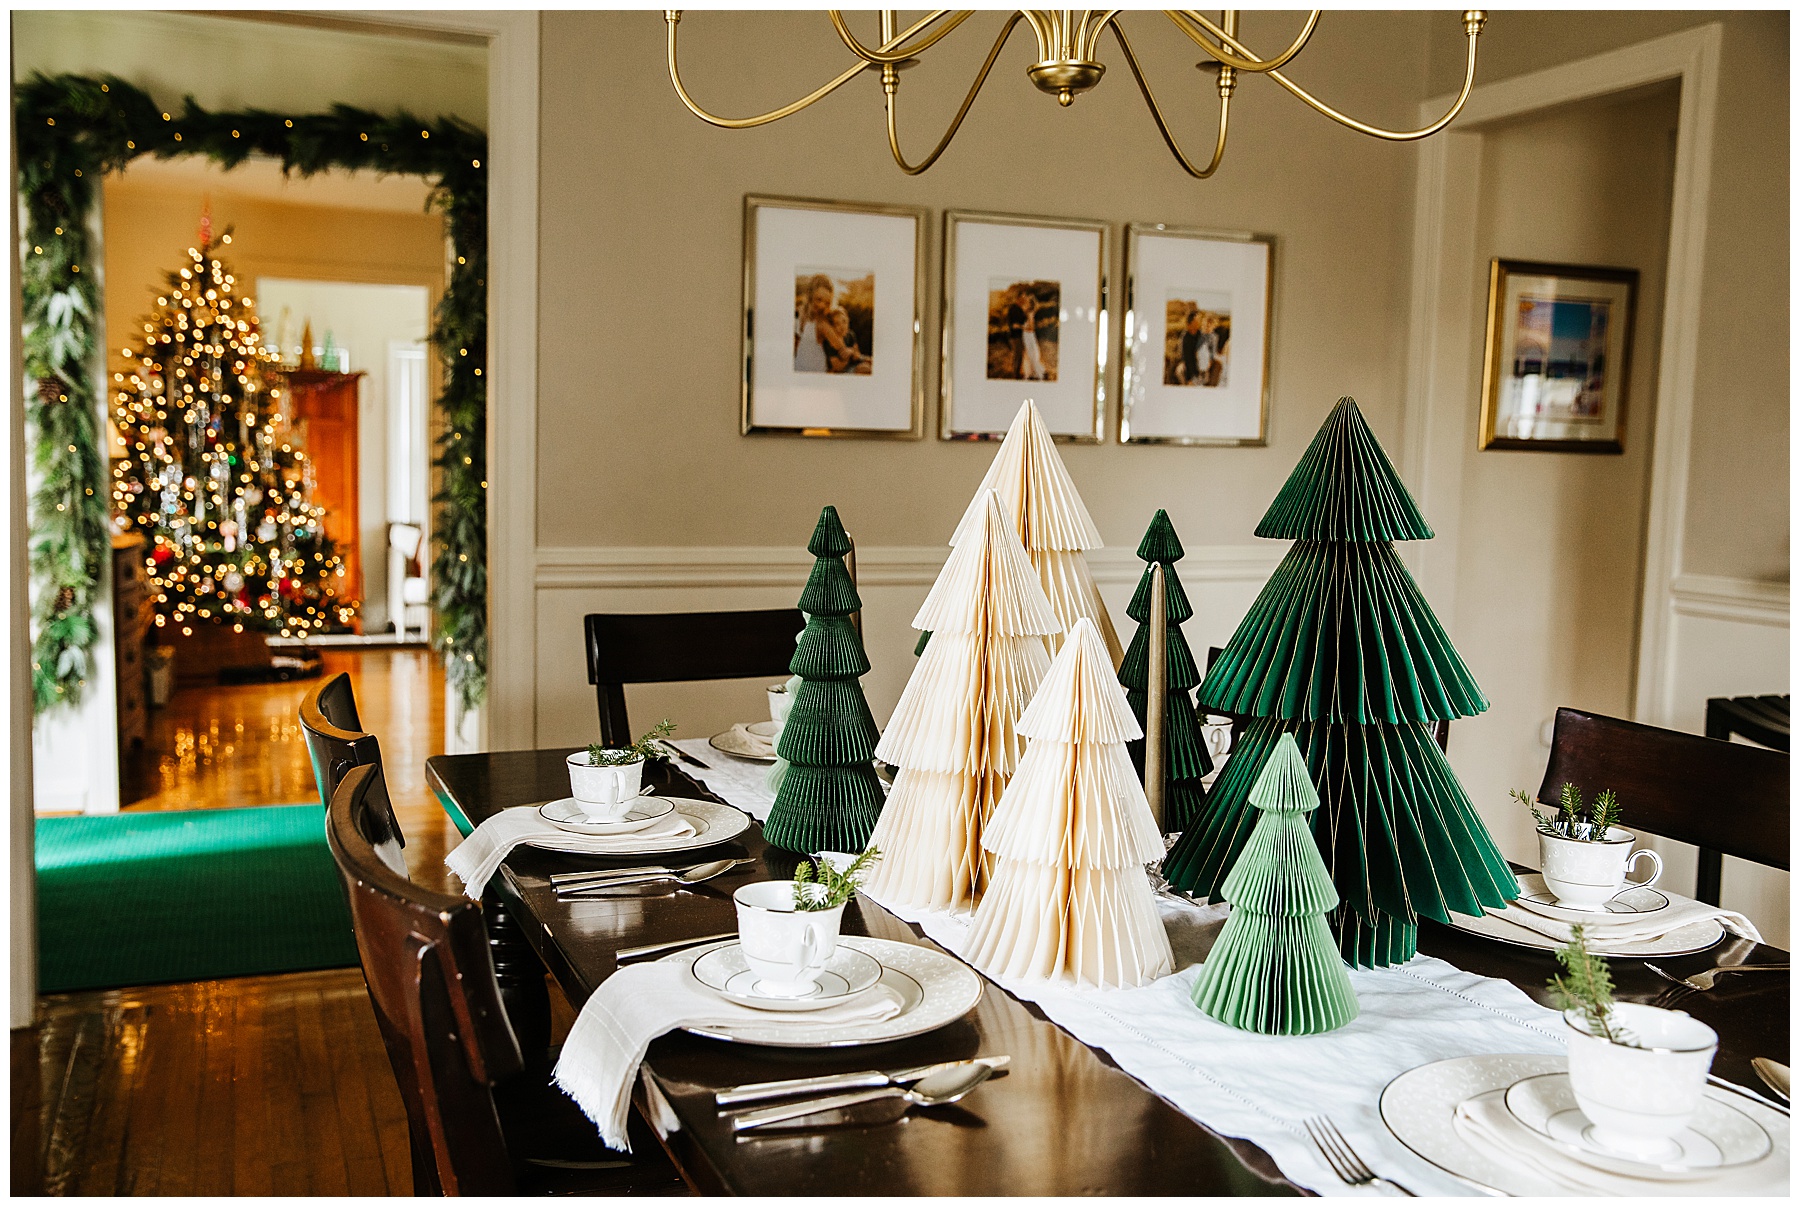 Dining room table decorated with paper Christmas trees showing the family Christmas tree in the distant room.